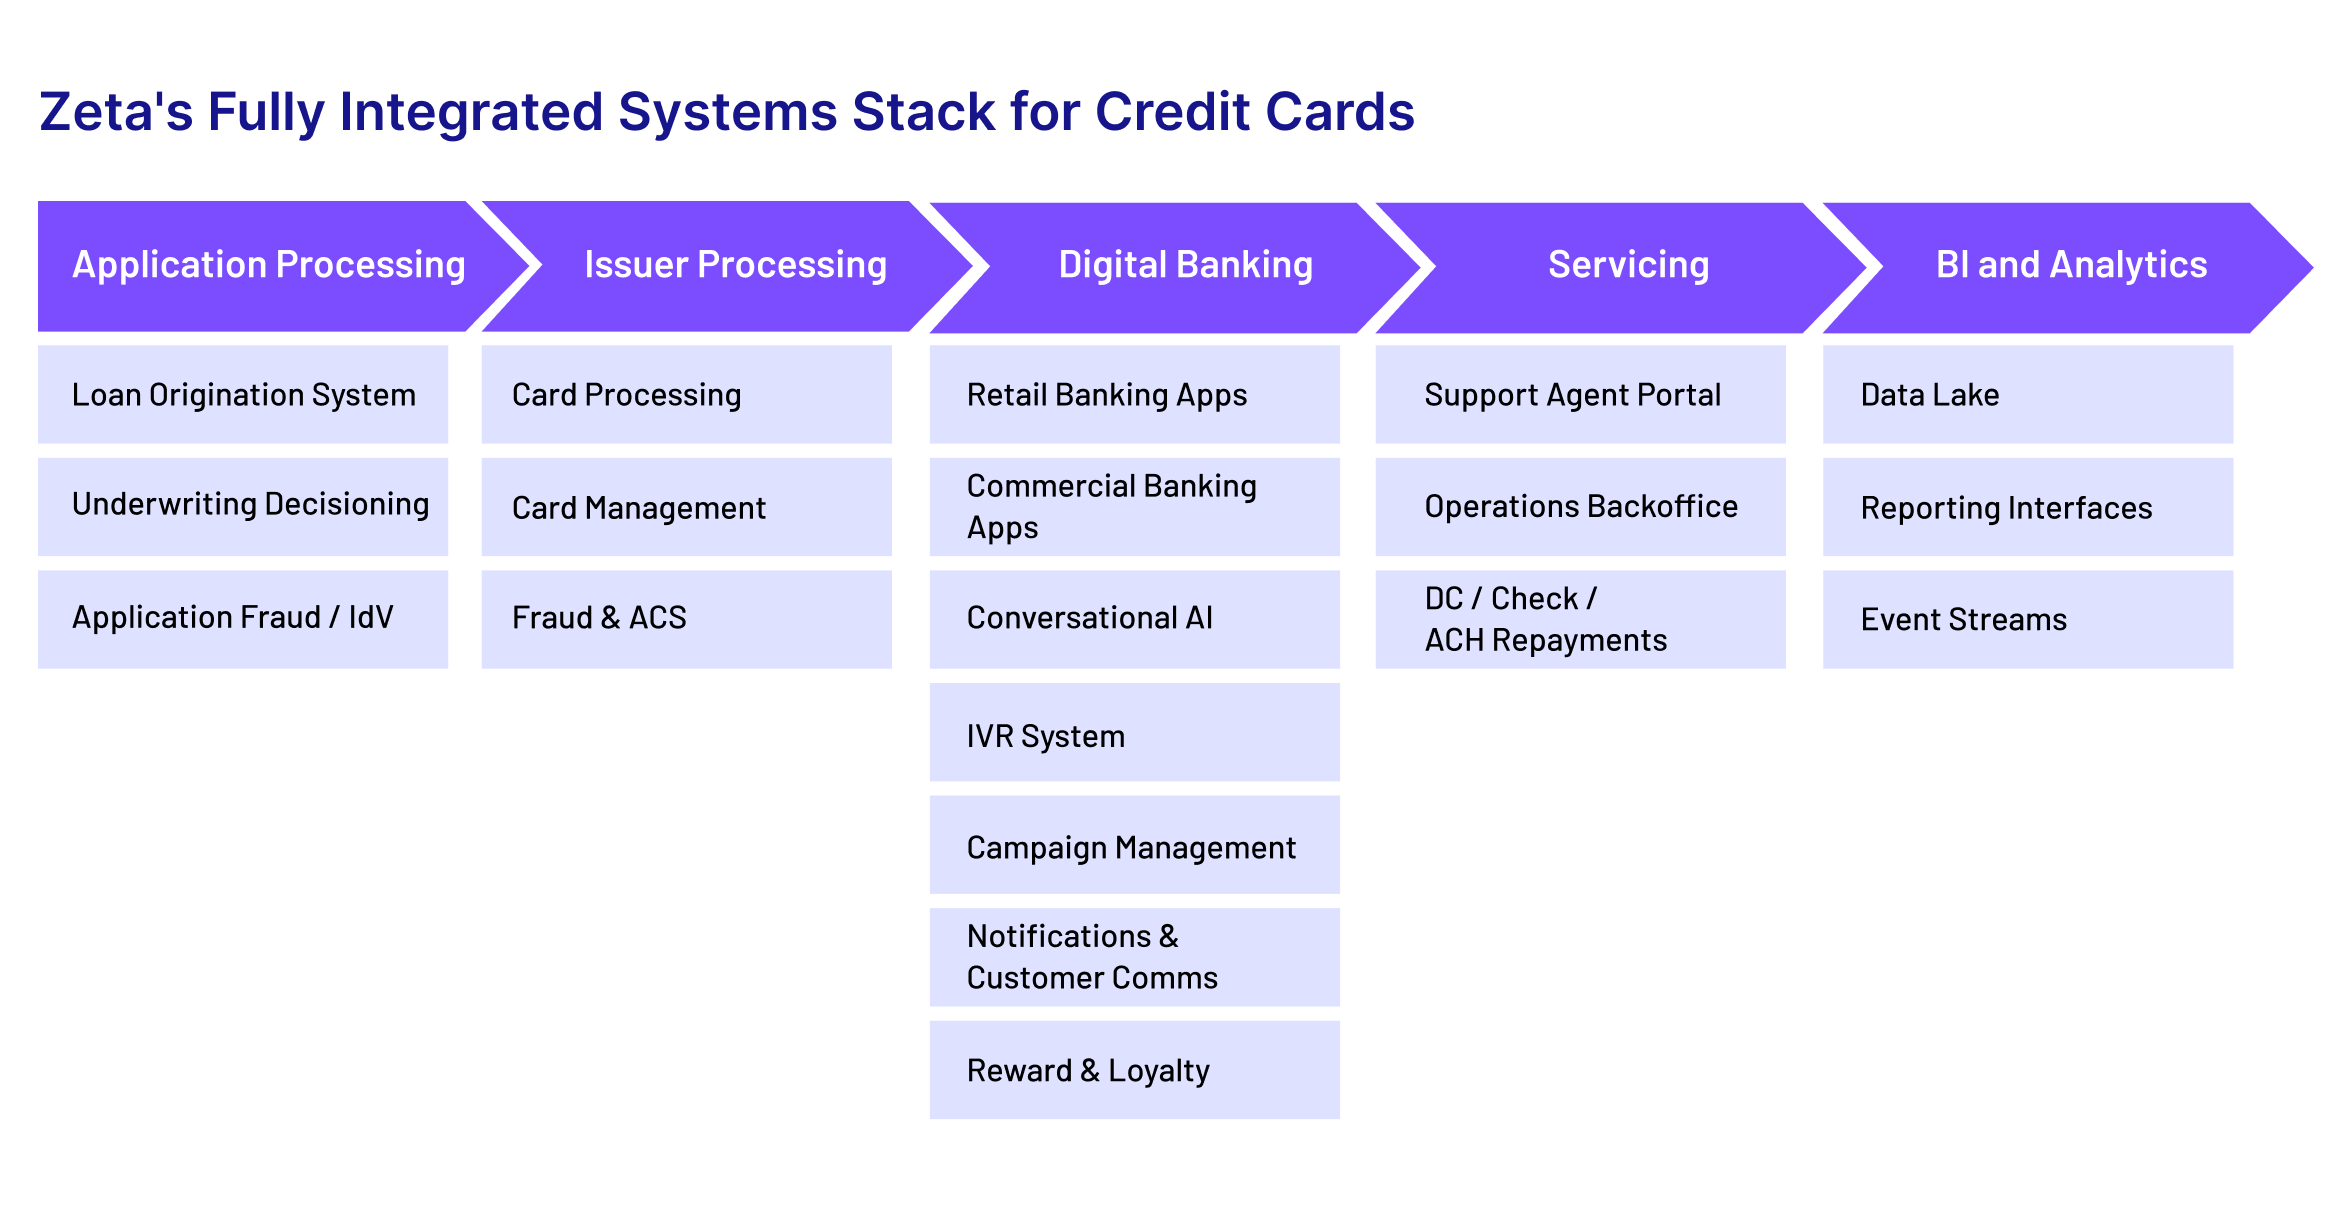 Zeta's integrated systems stack for credit cards